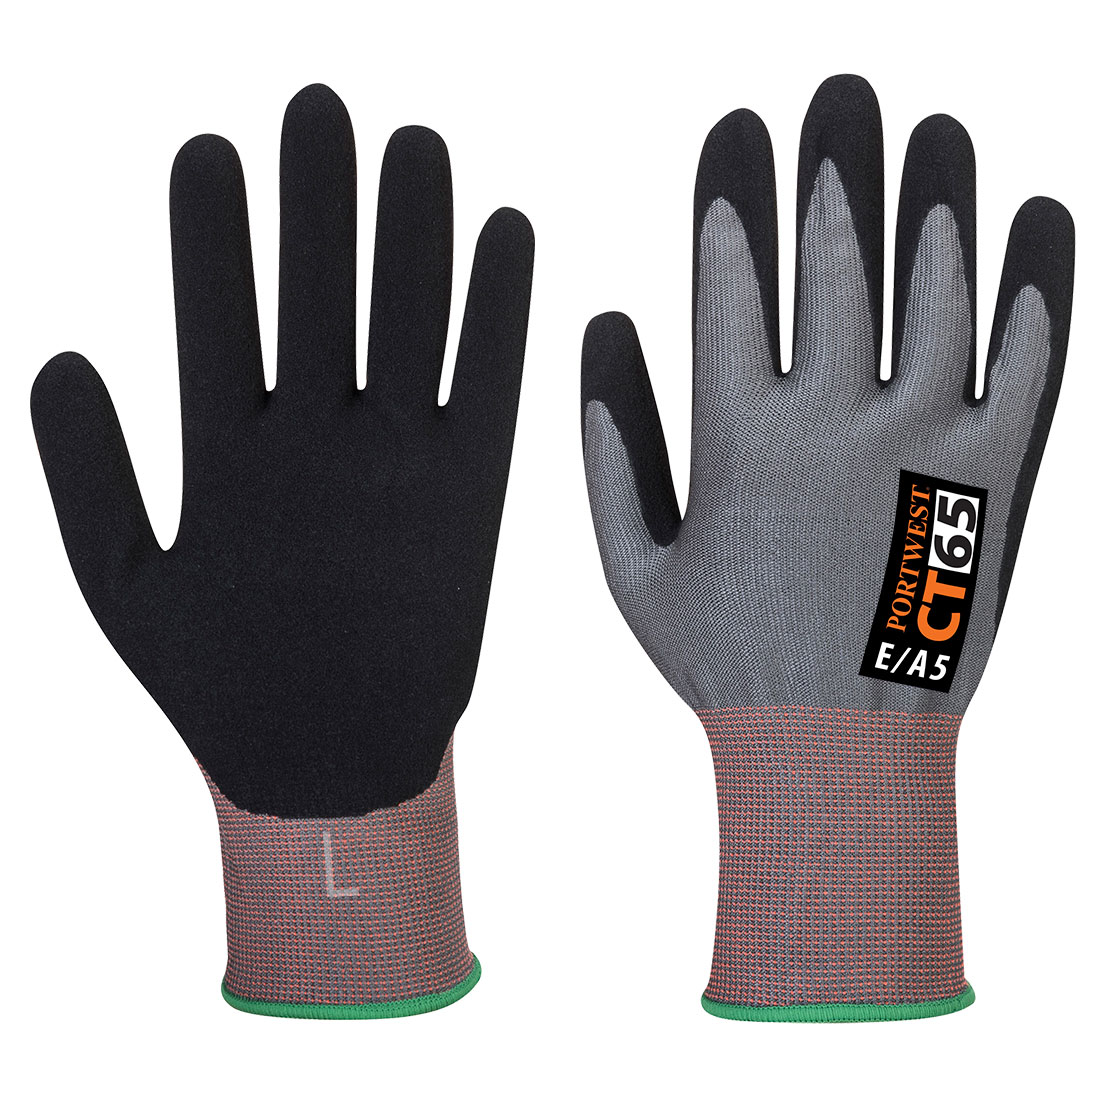 CT65  Portwest® A5 Cut Resistant Seamless Knit Nitrile Foam Coated Work Gloves